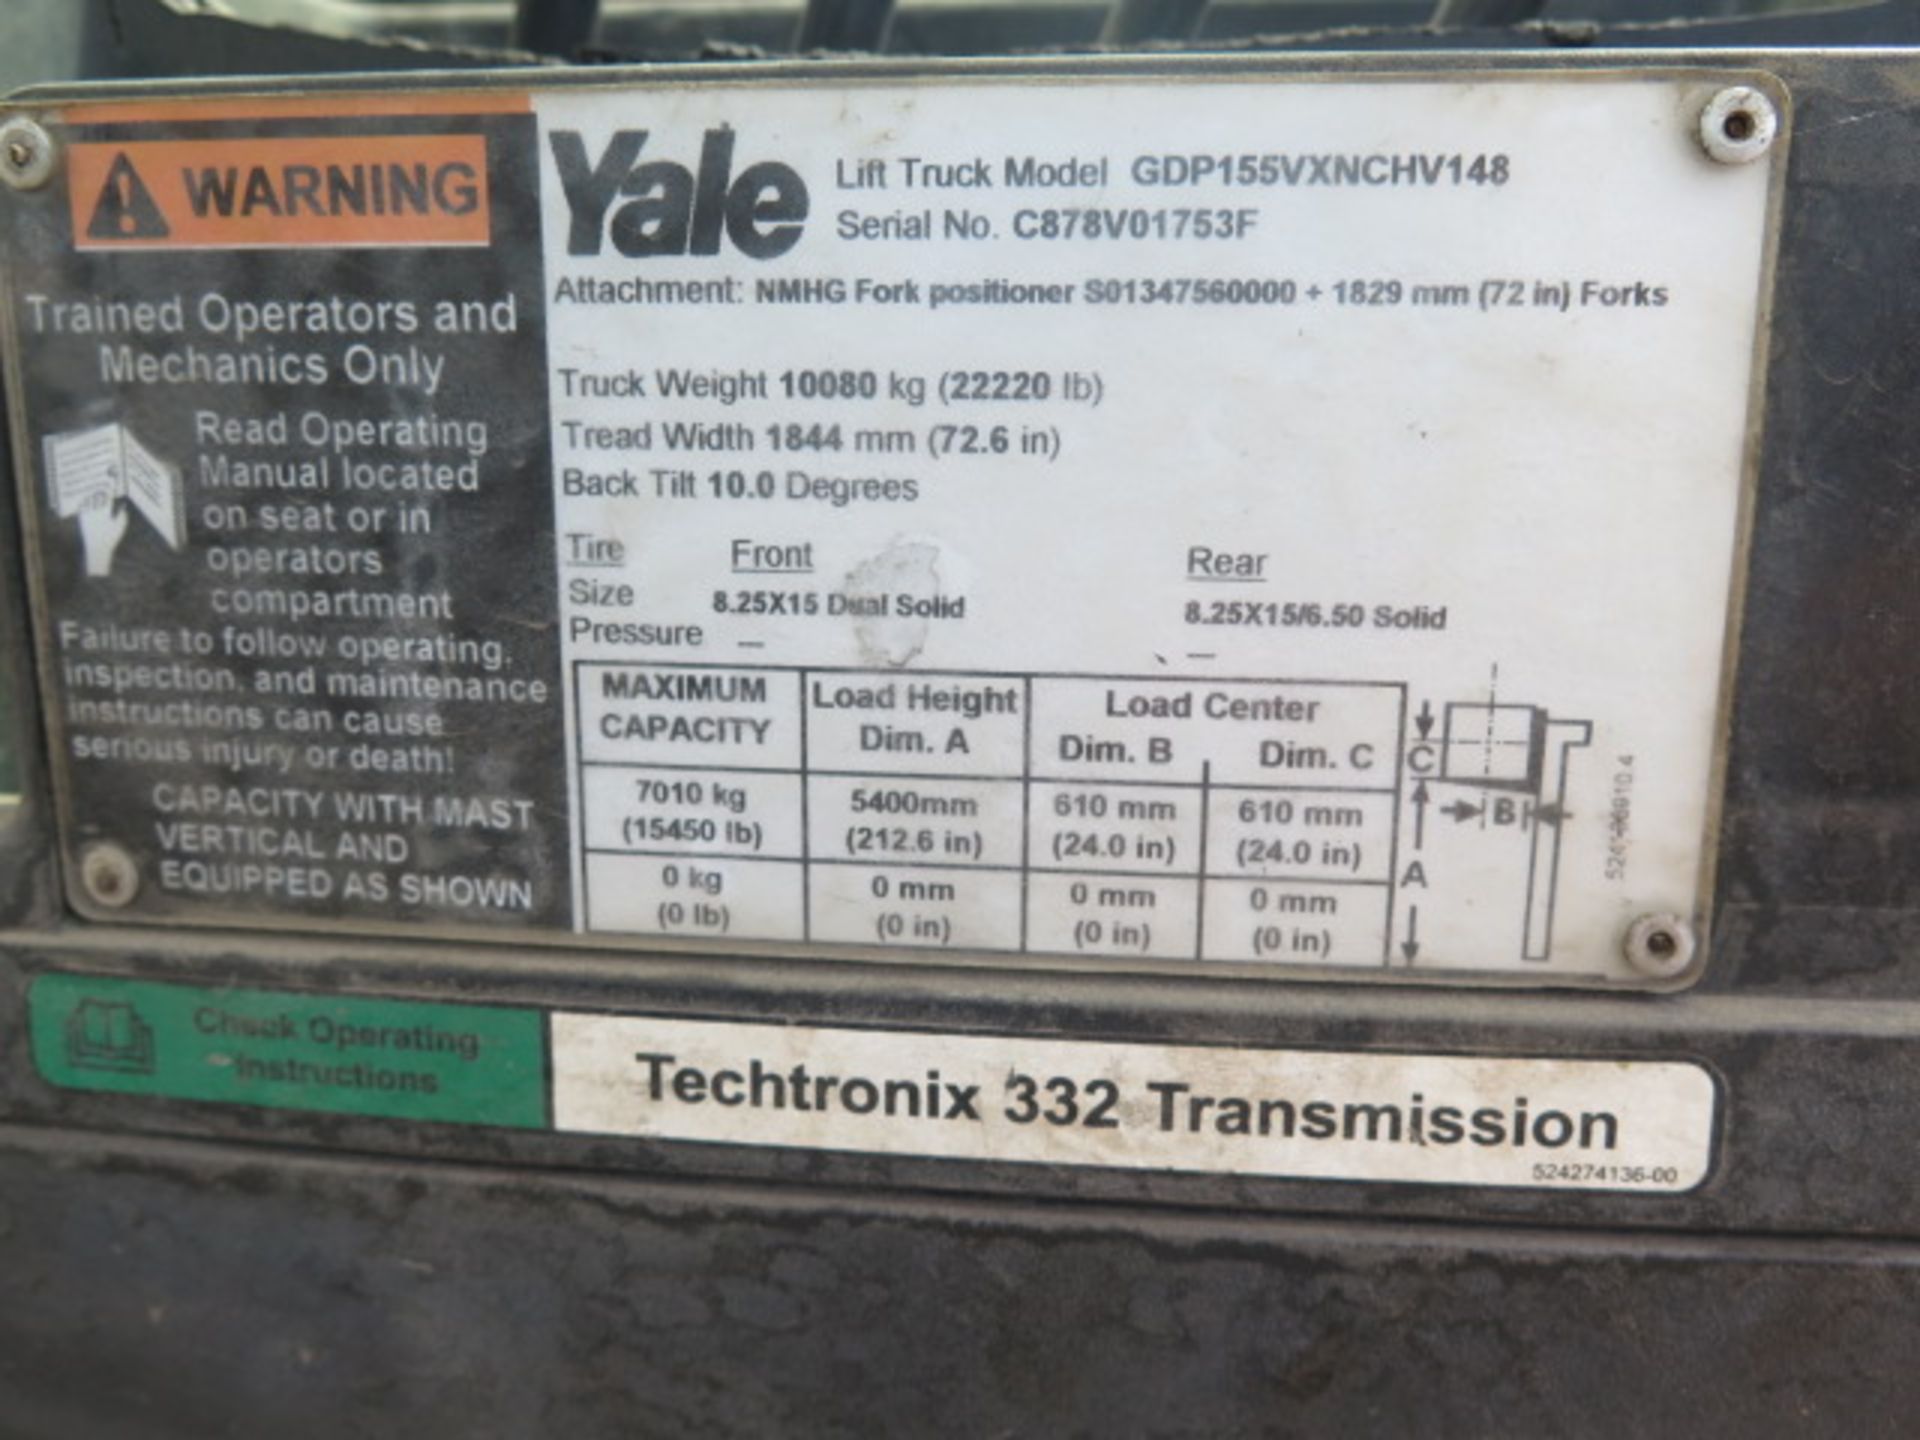 Yale GDP155VXNCHV148 15,400 Lb Cap Diesel Forklift s/n C878V01753F w/ 2-Stage Tall Mast, 212” Lift - Image 7 of 7